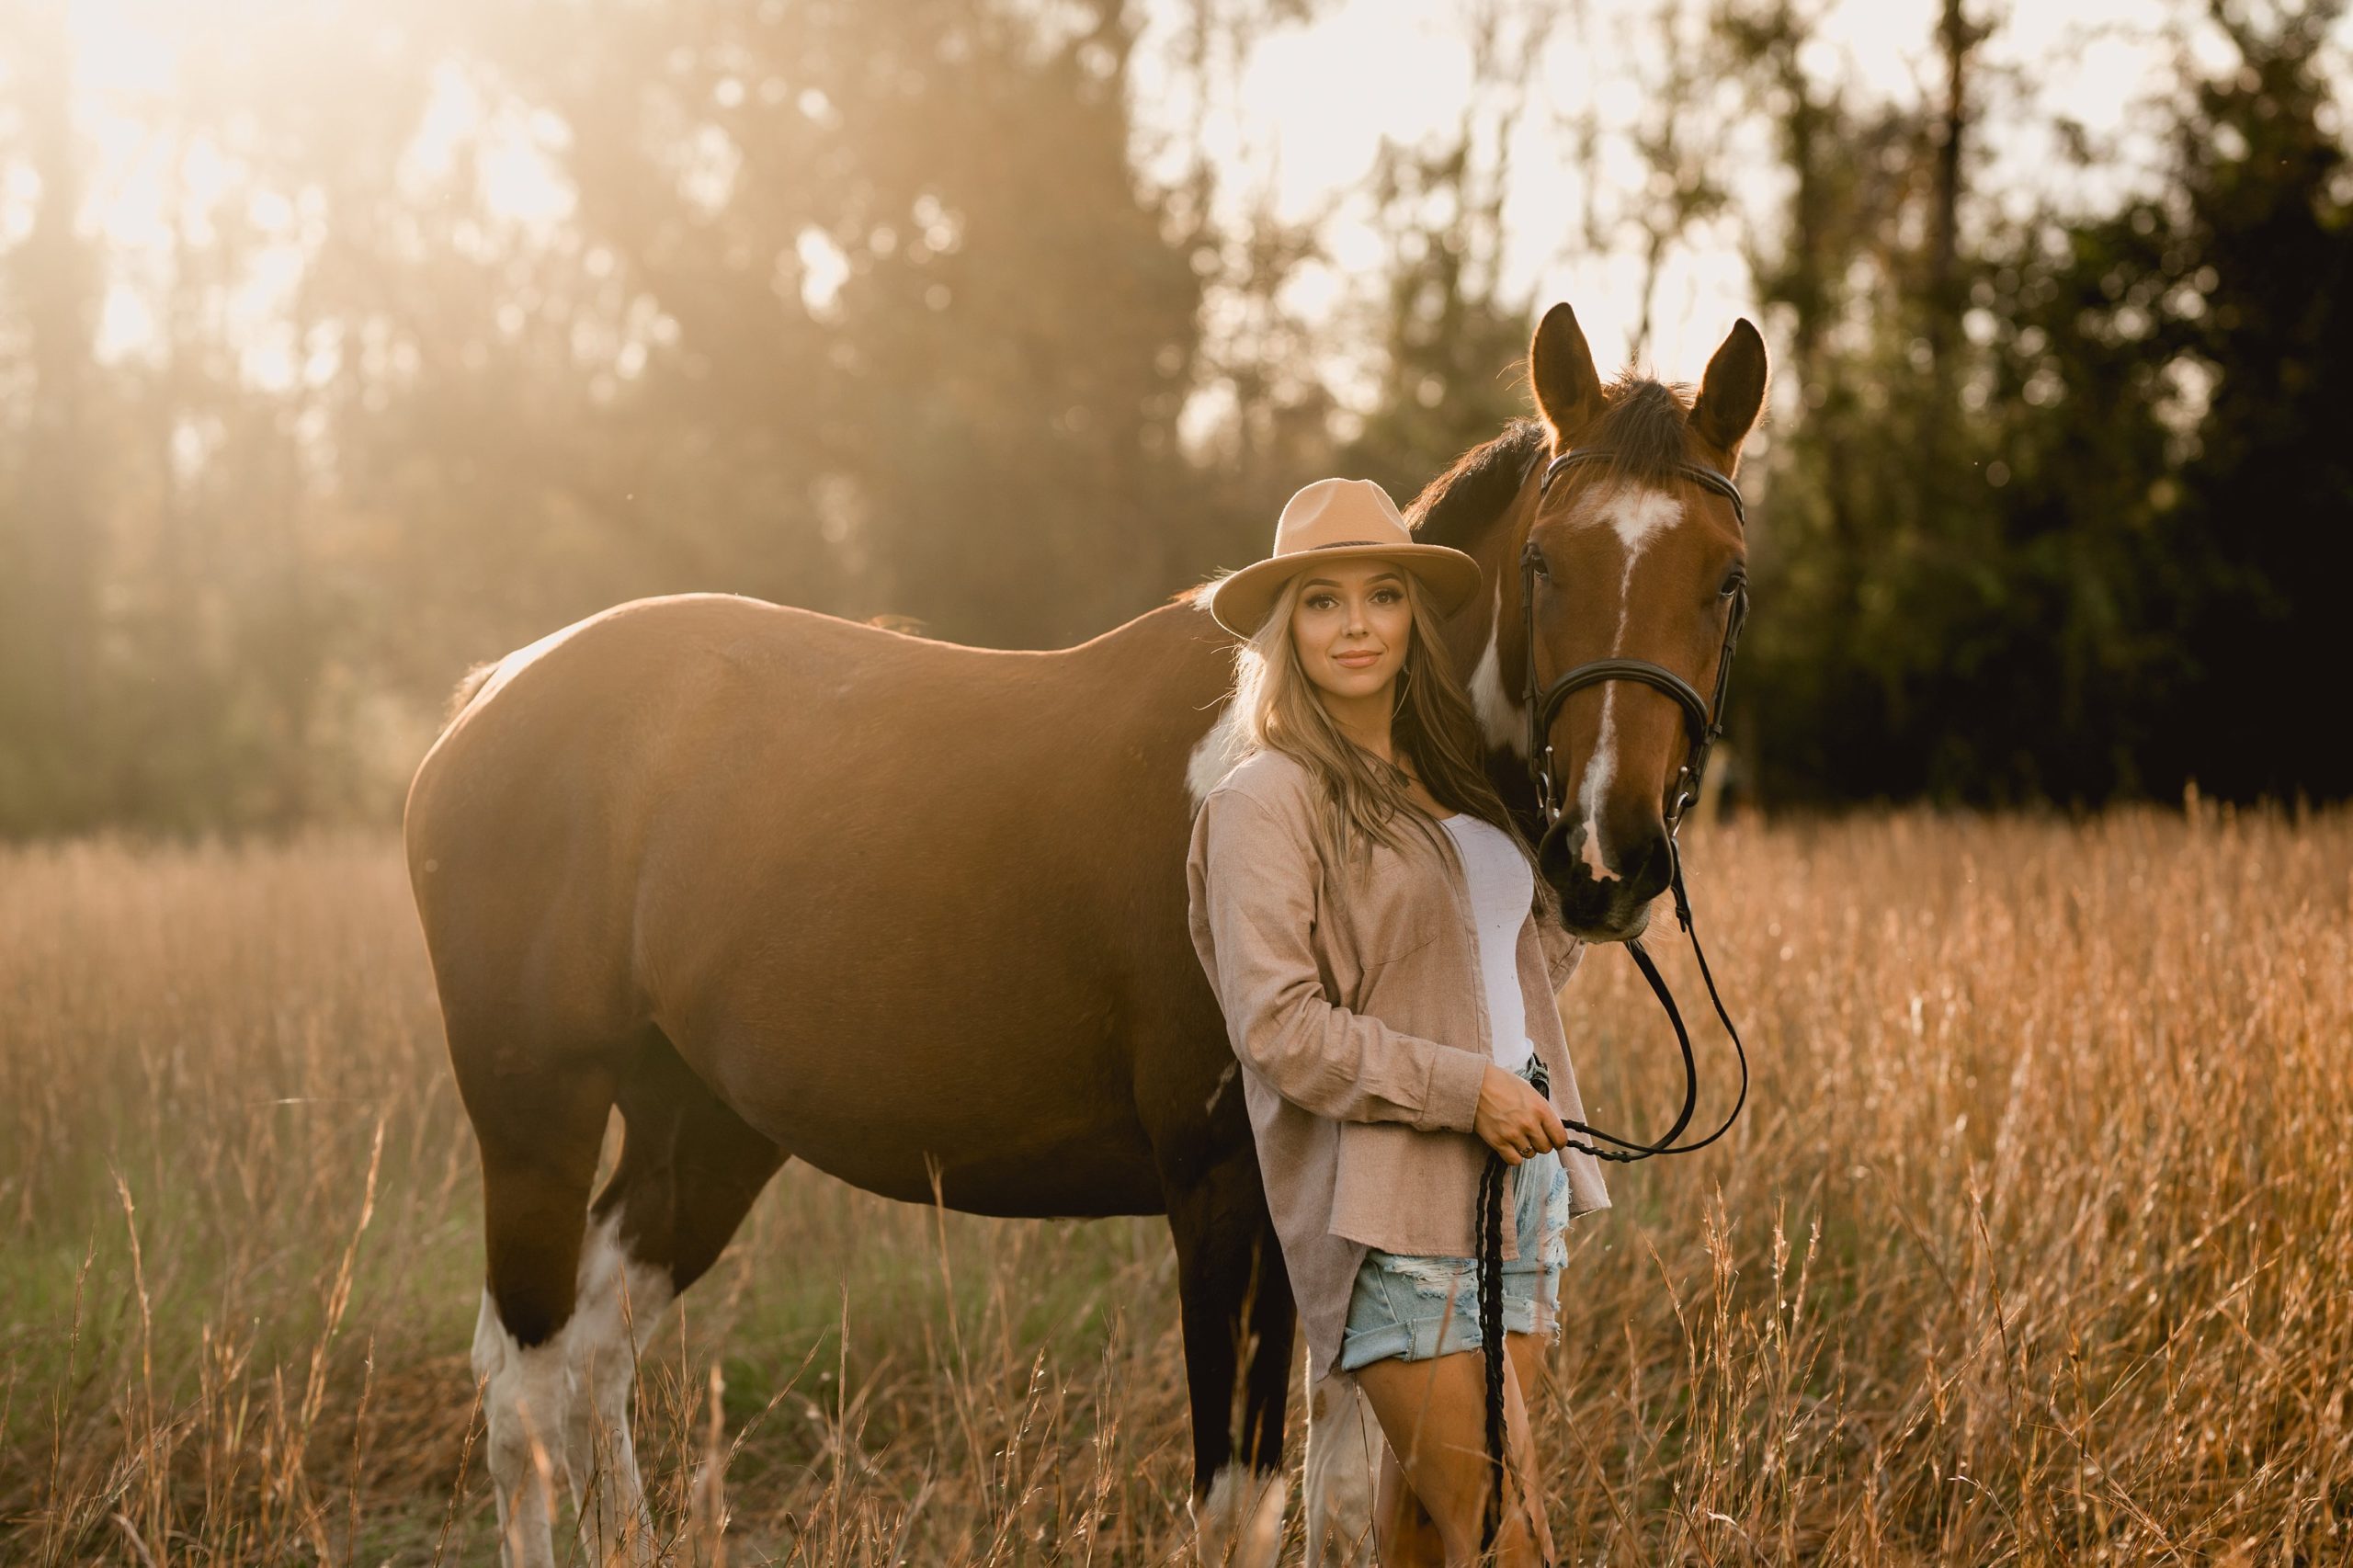 Tallahassee equine photographer specializing in sunset photos.